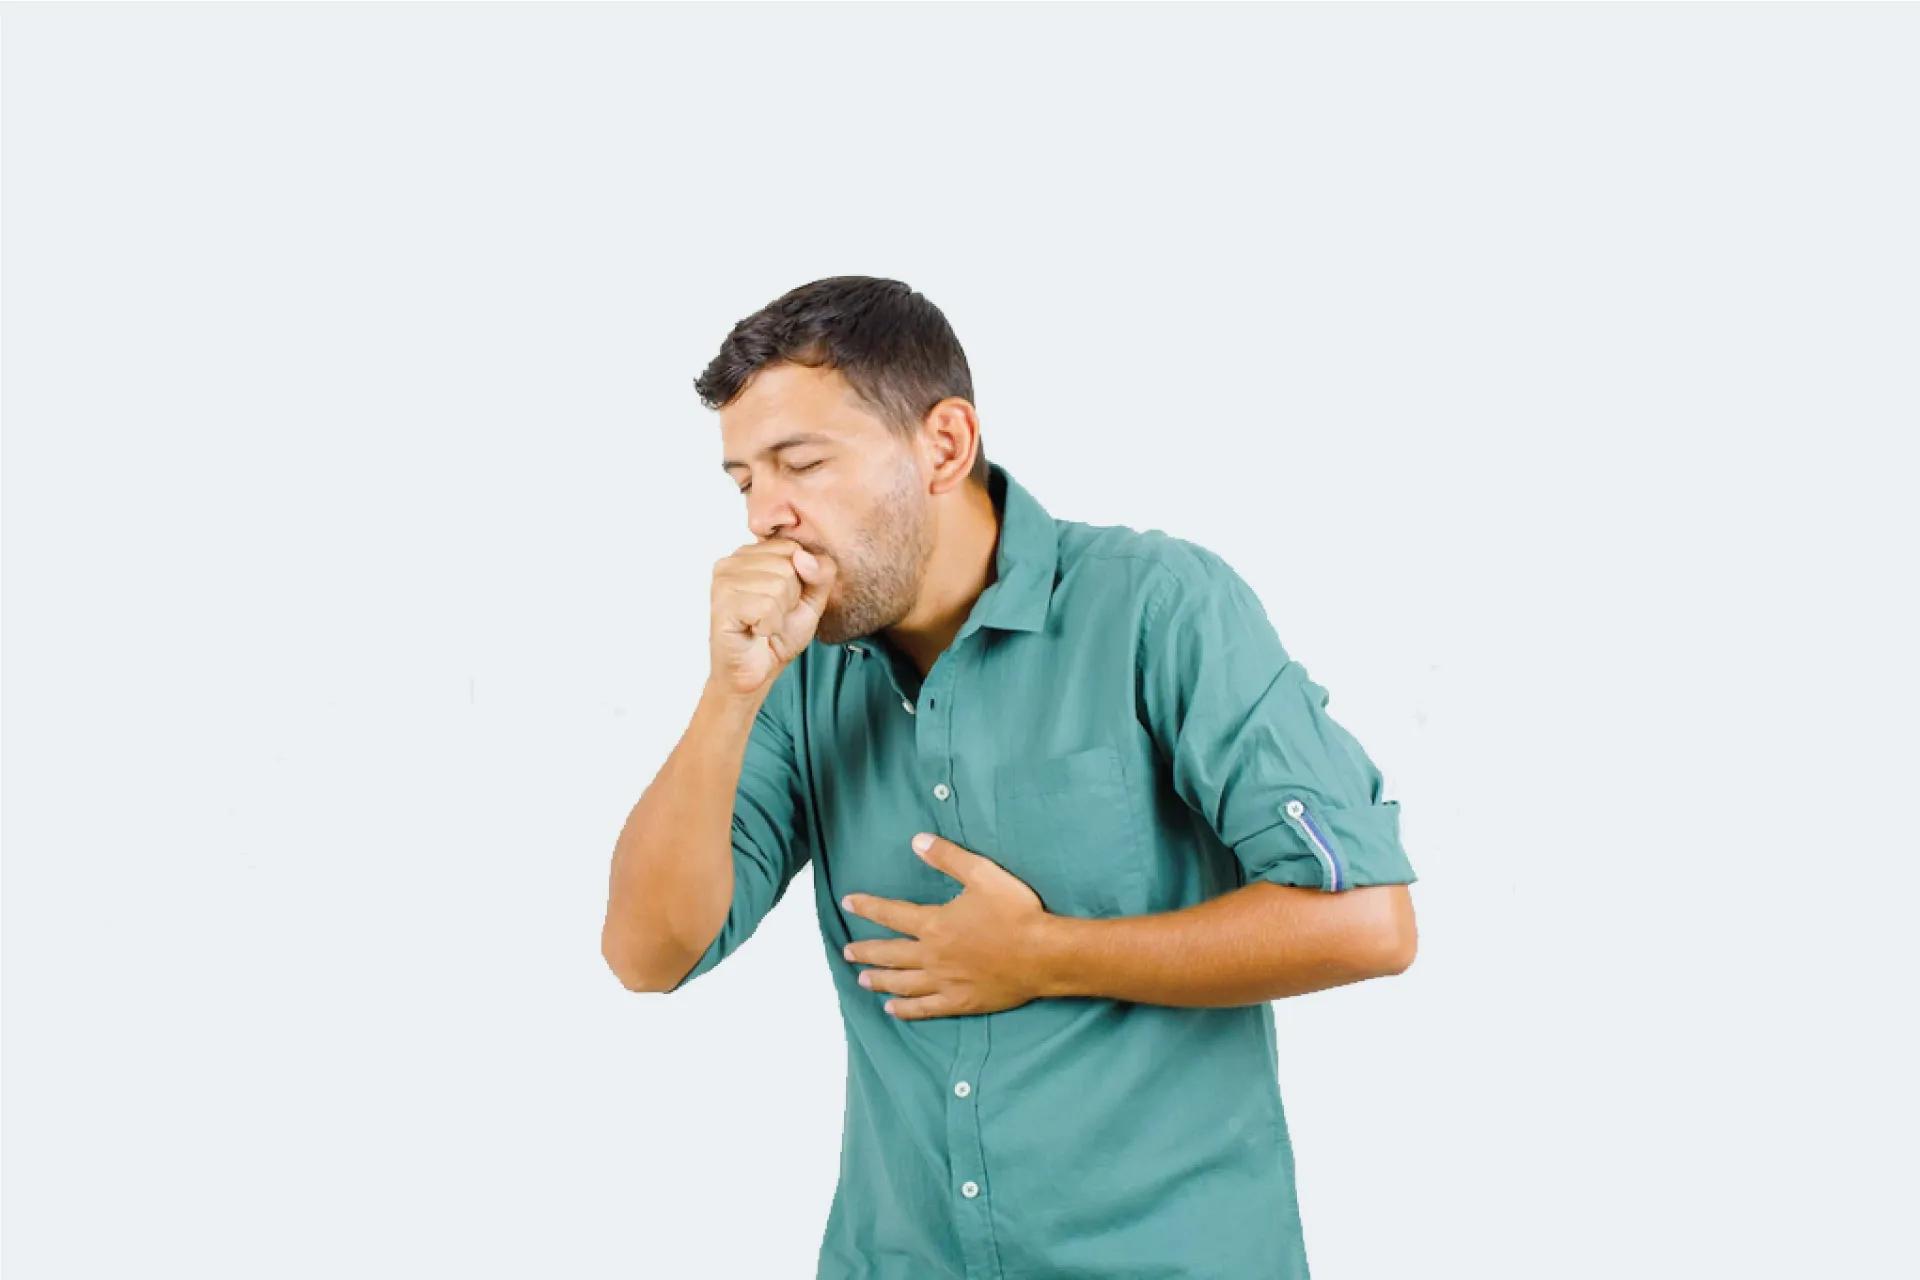 Bronchitis: Meaning, Type, Causes, and Treatment